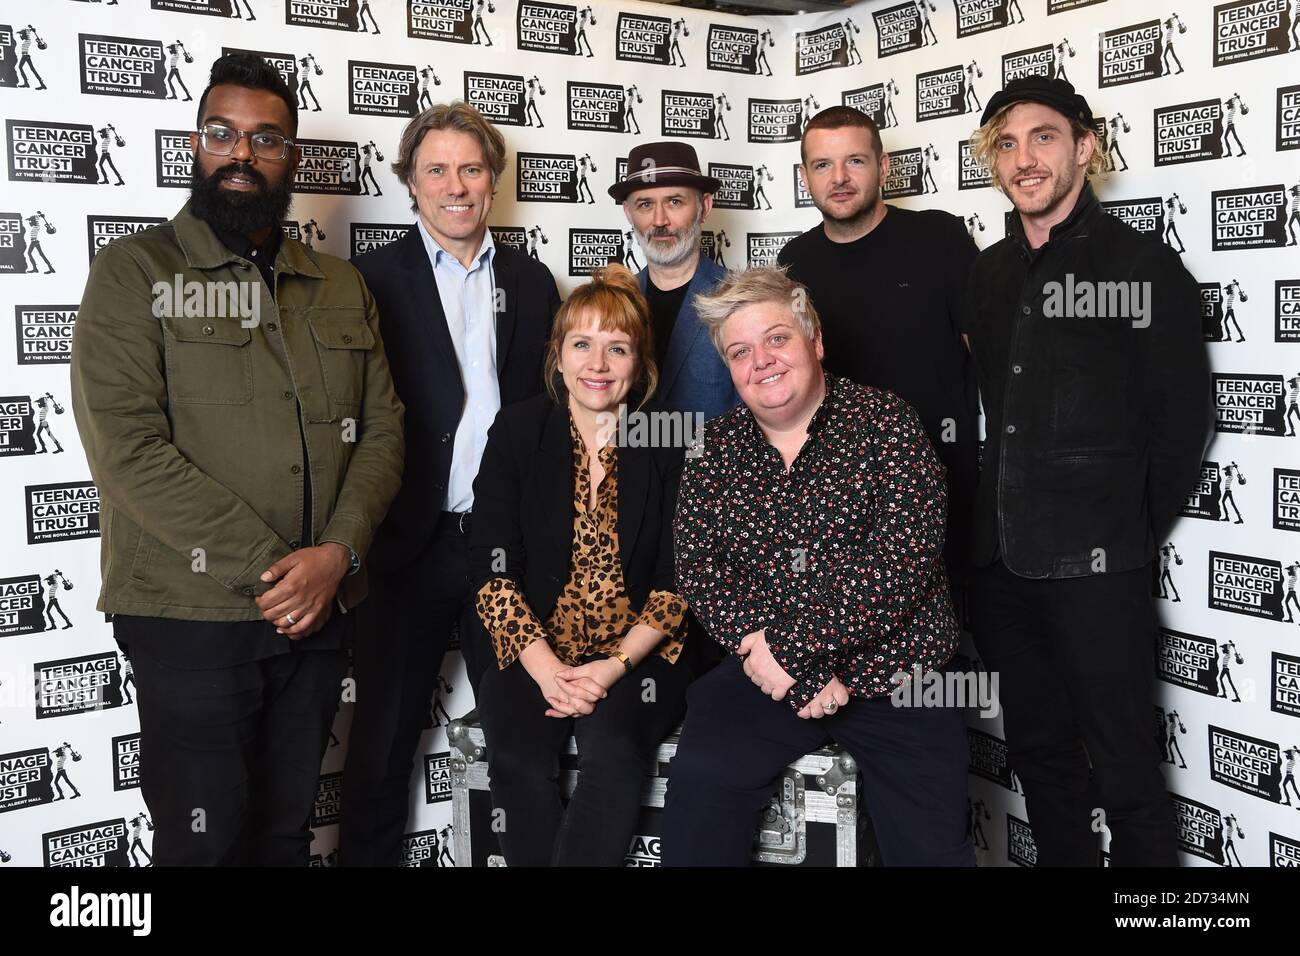 Comedians Romesh Ranganathan, John Bishop, Kerry Godliman, Tommy Tiernan, Susie McCabe, Kevin Bridges and Seann Walsh during the Teenage Cancer Trust comedy night, at the Royal Albert Hall, London. Picture date: Wednesday March 27, 2019. Photo credit should read: Matt Crossick/Empics Stock Photo